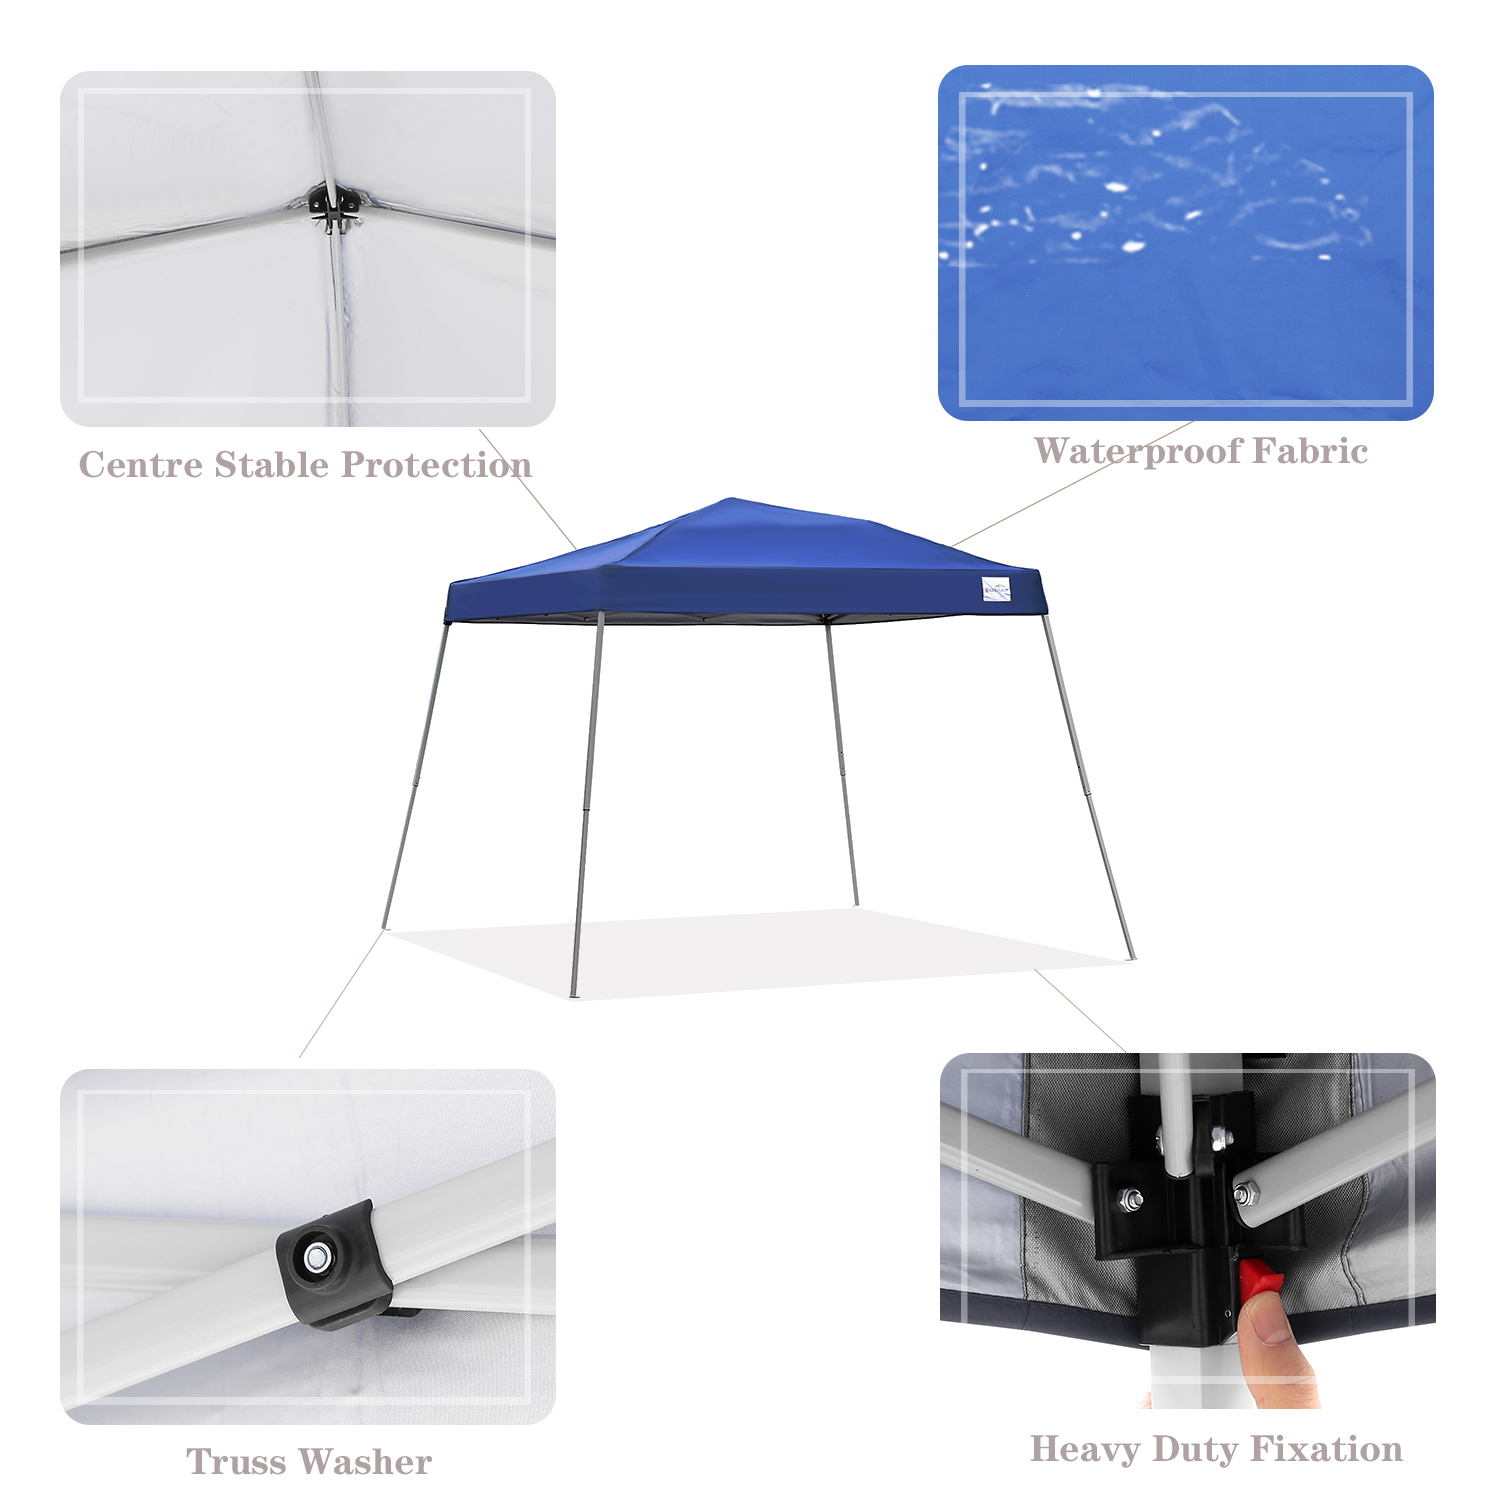 Ainfox 10ft x10ft Patio Canopy Tent $39.00 +Free Shipping $39.99